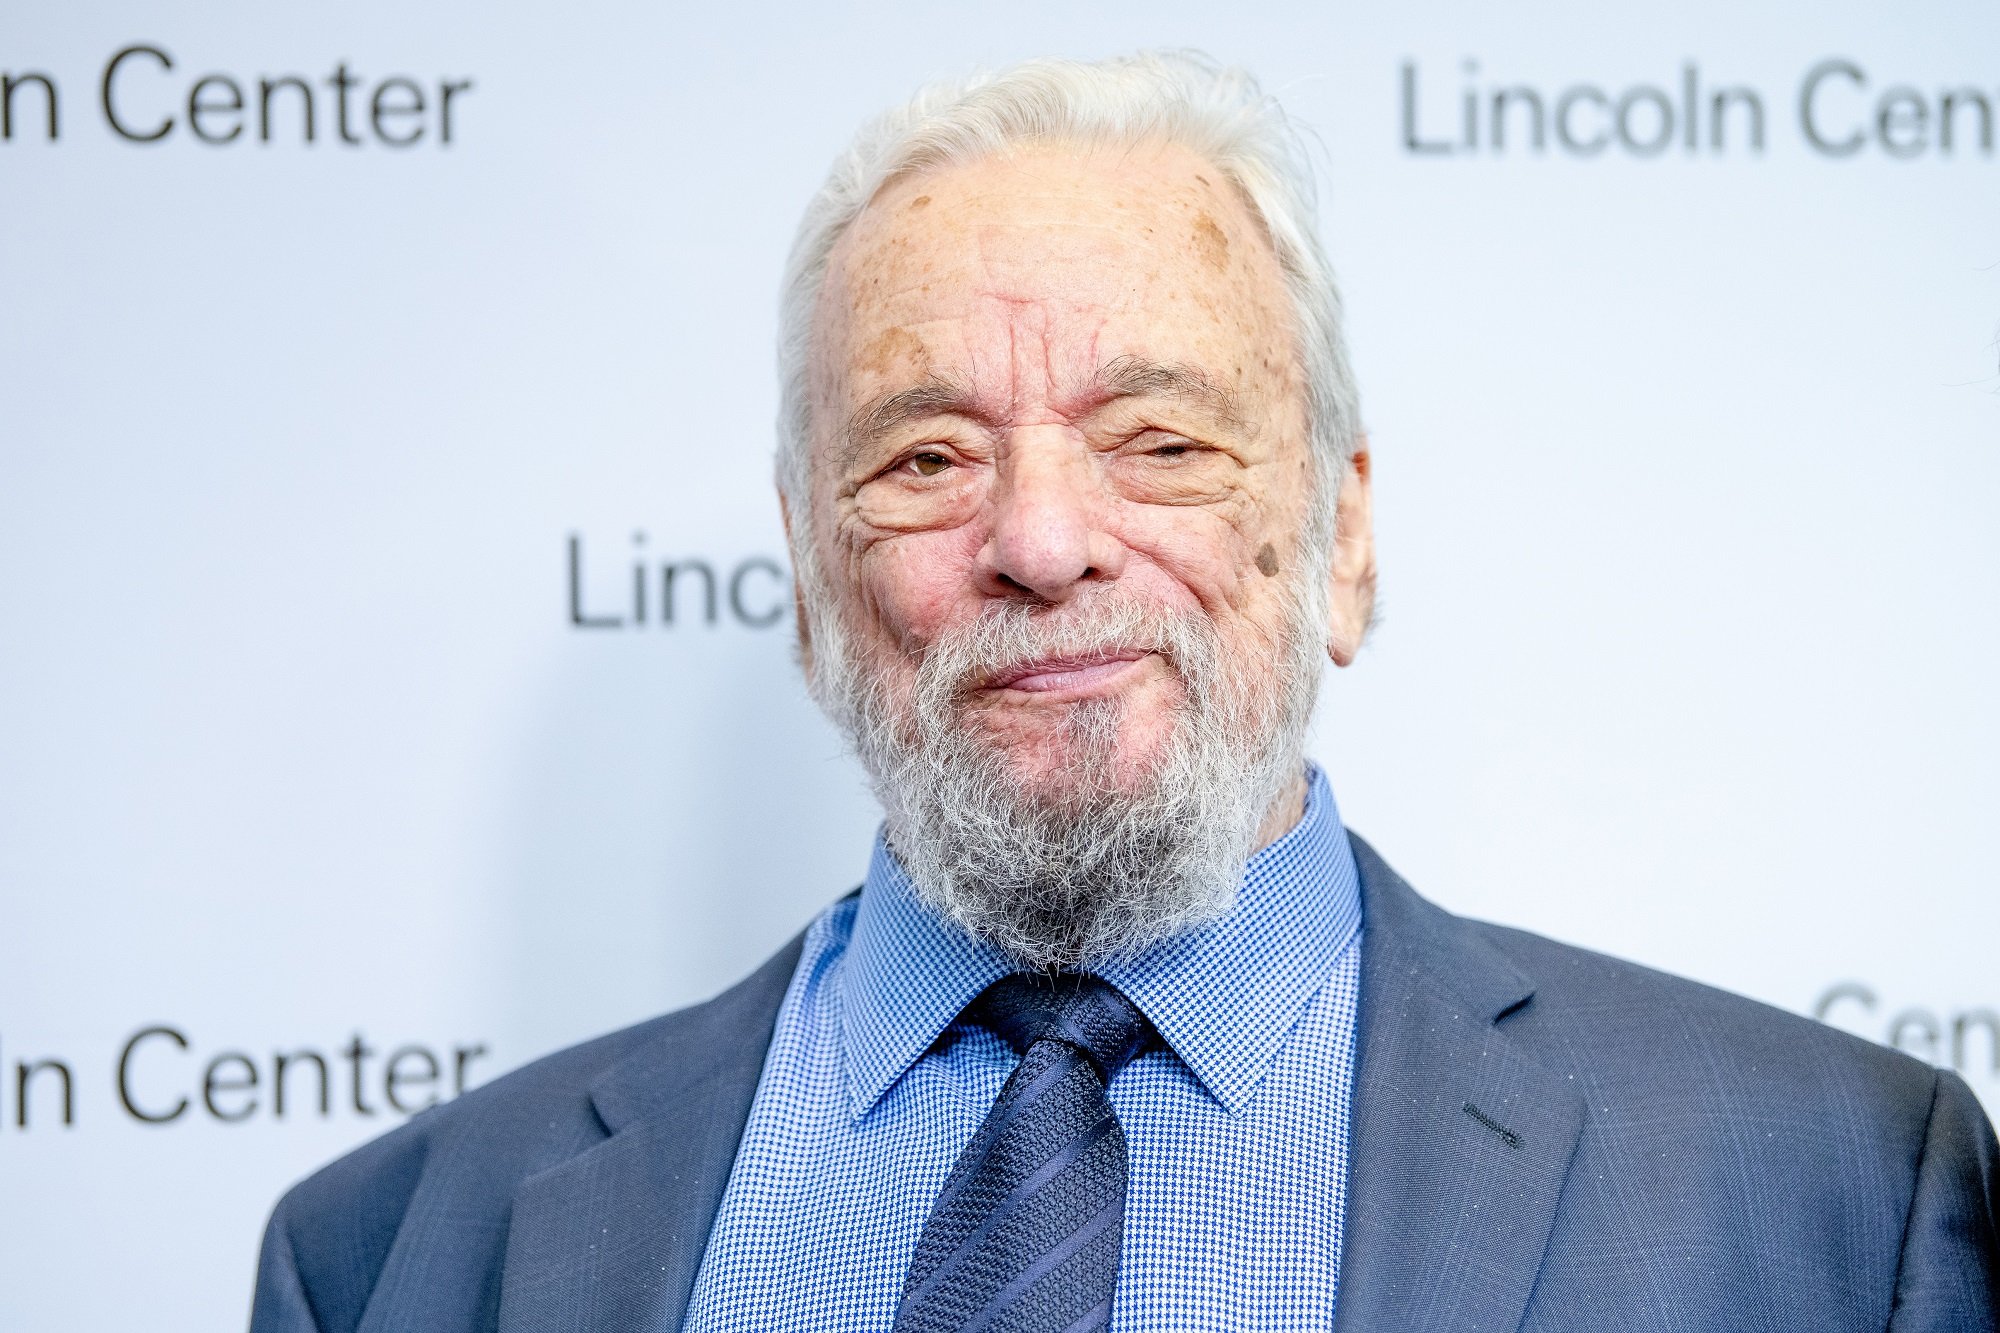 Stephen Sondheim, pictured here in a blue suit with a blue shirt and a blue tie, has died